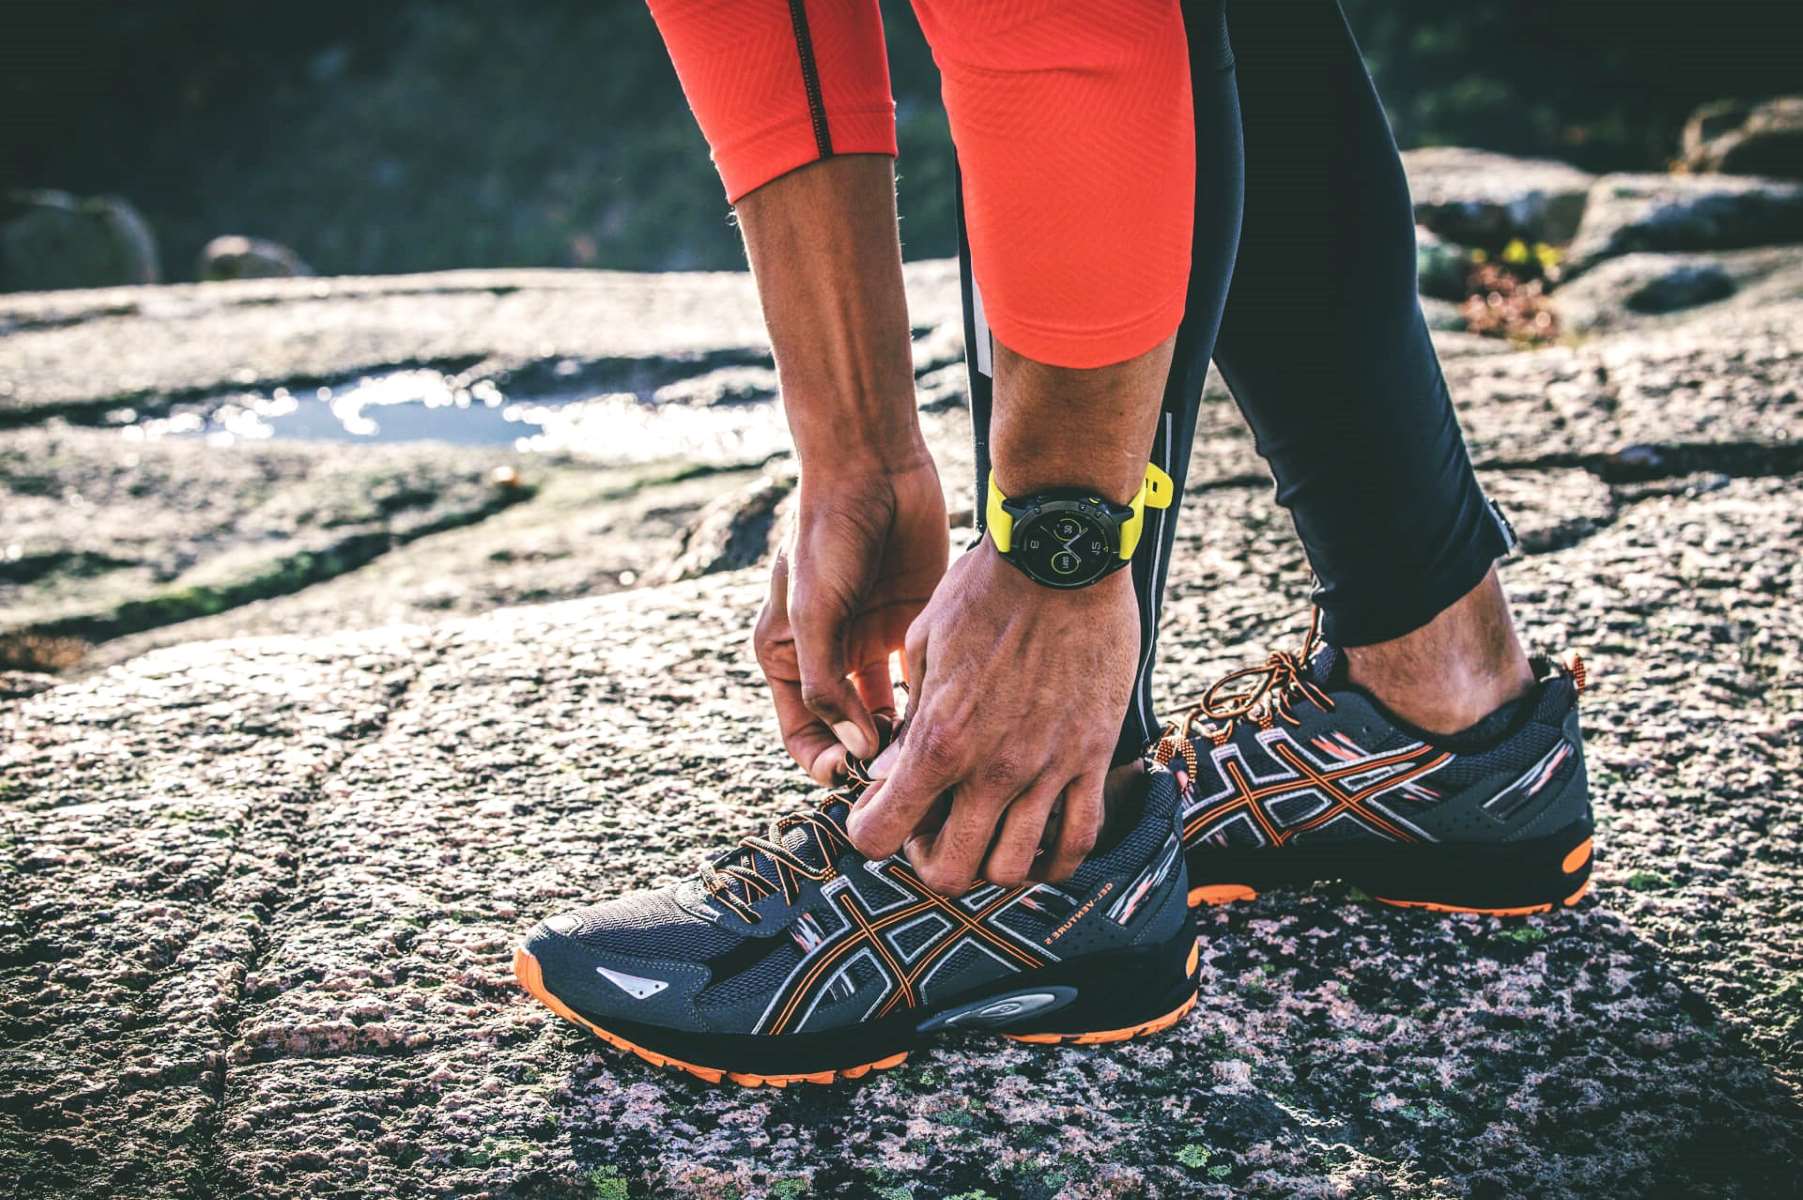 Top Running Deals On GPS Watches And Running Shoes During Amazon Prime Day